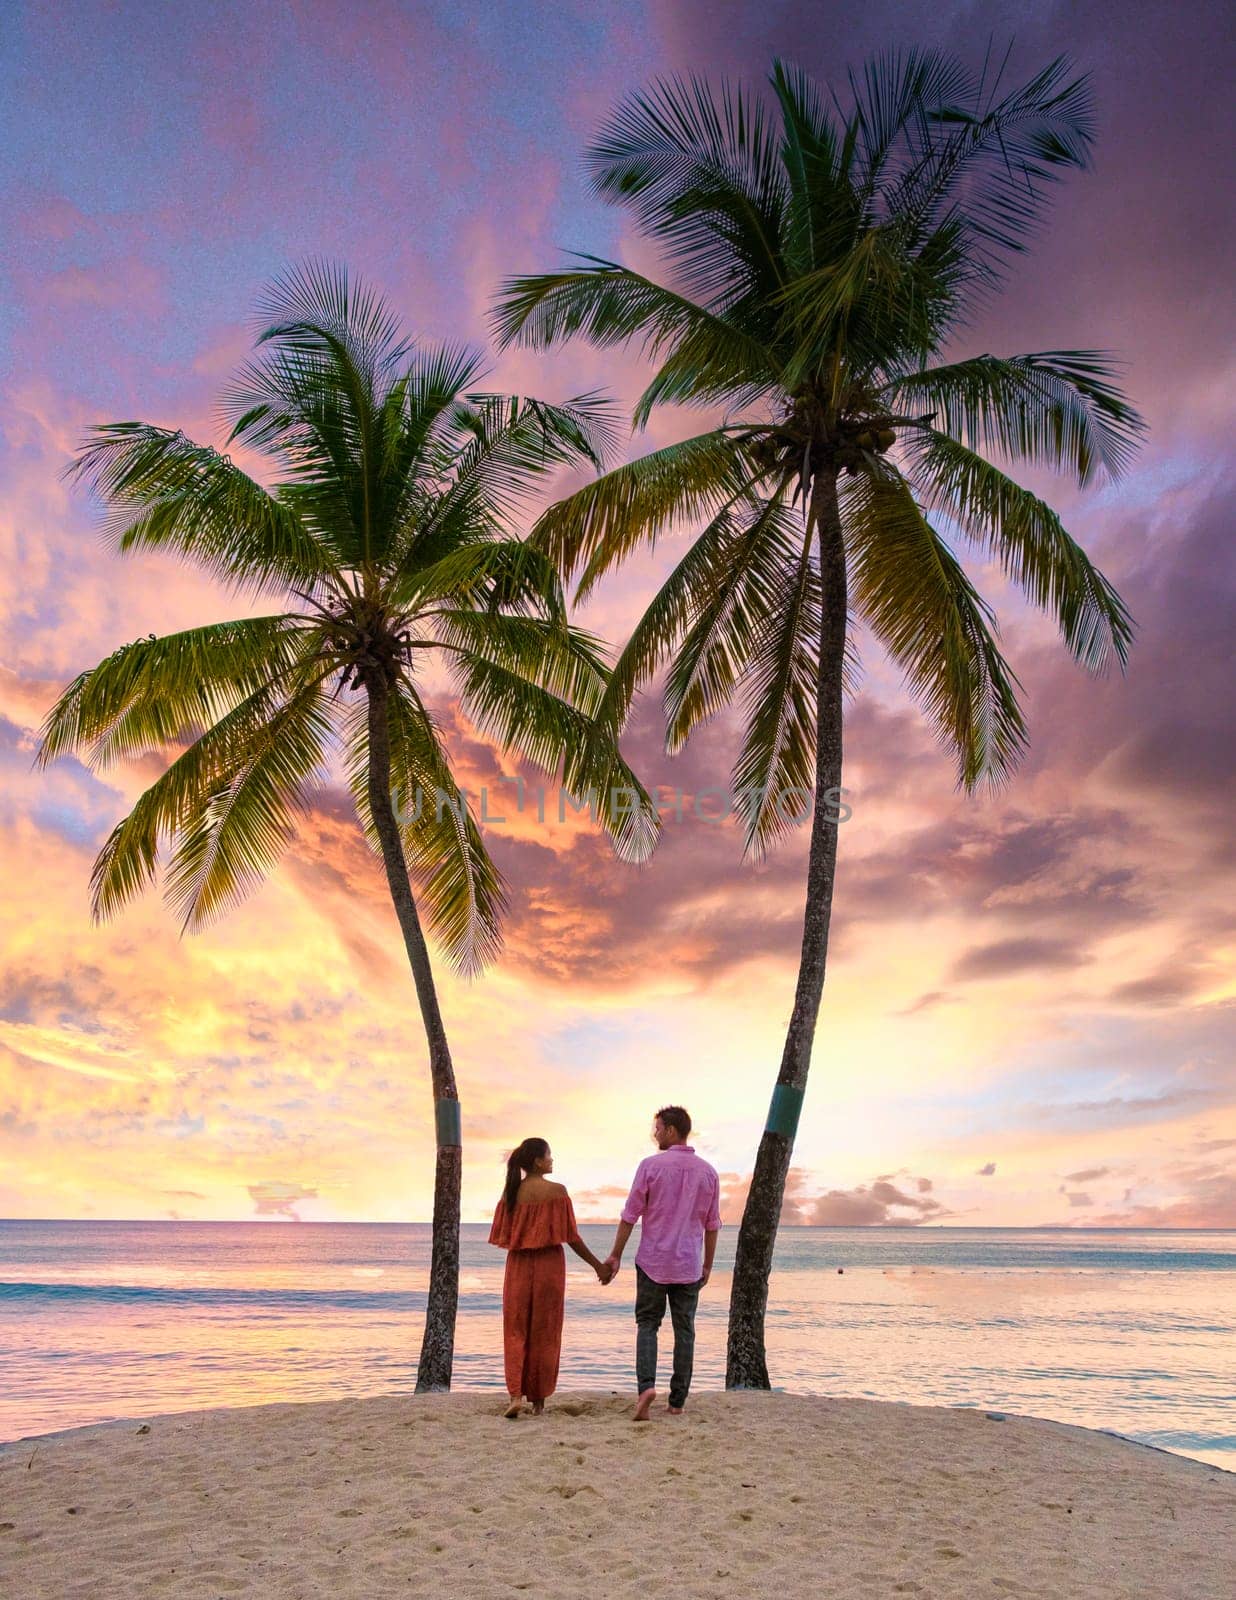 couple on the beach with palm trees watching the sunset at the tropical beach of Saint Lucia or St Lucia Caribbean. men and women on vacation in St Lucia a tropical island with palm trees